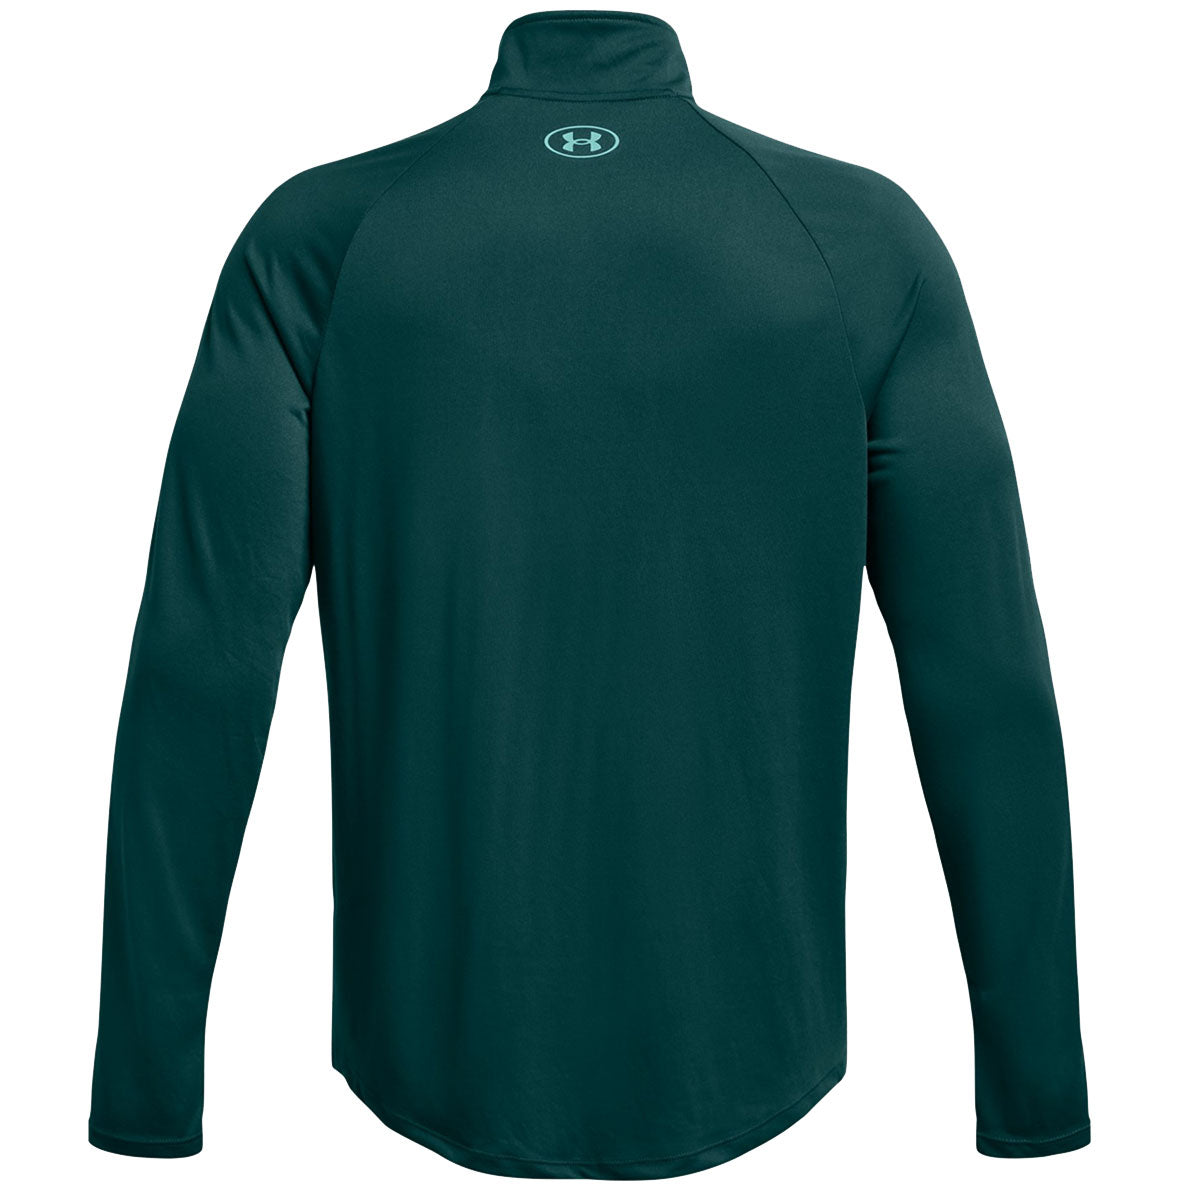 Under Armour Tech 1/2 Zip Training Top - Mens - Hydro Teal/Radial Turquoise